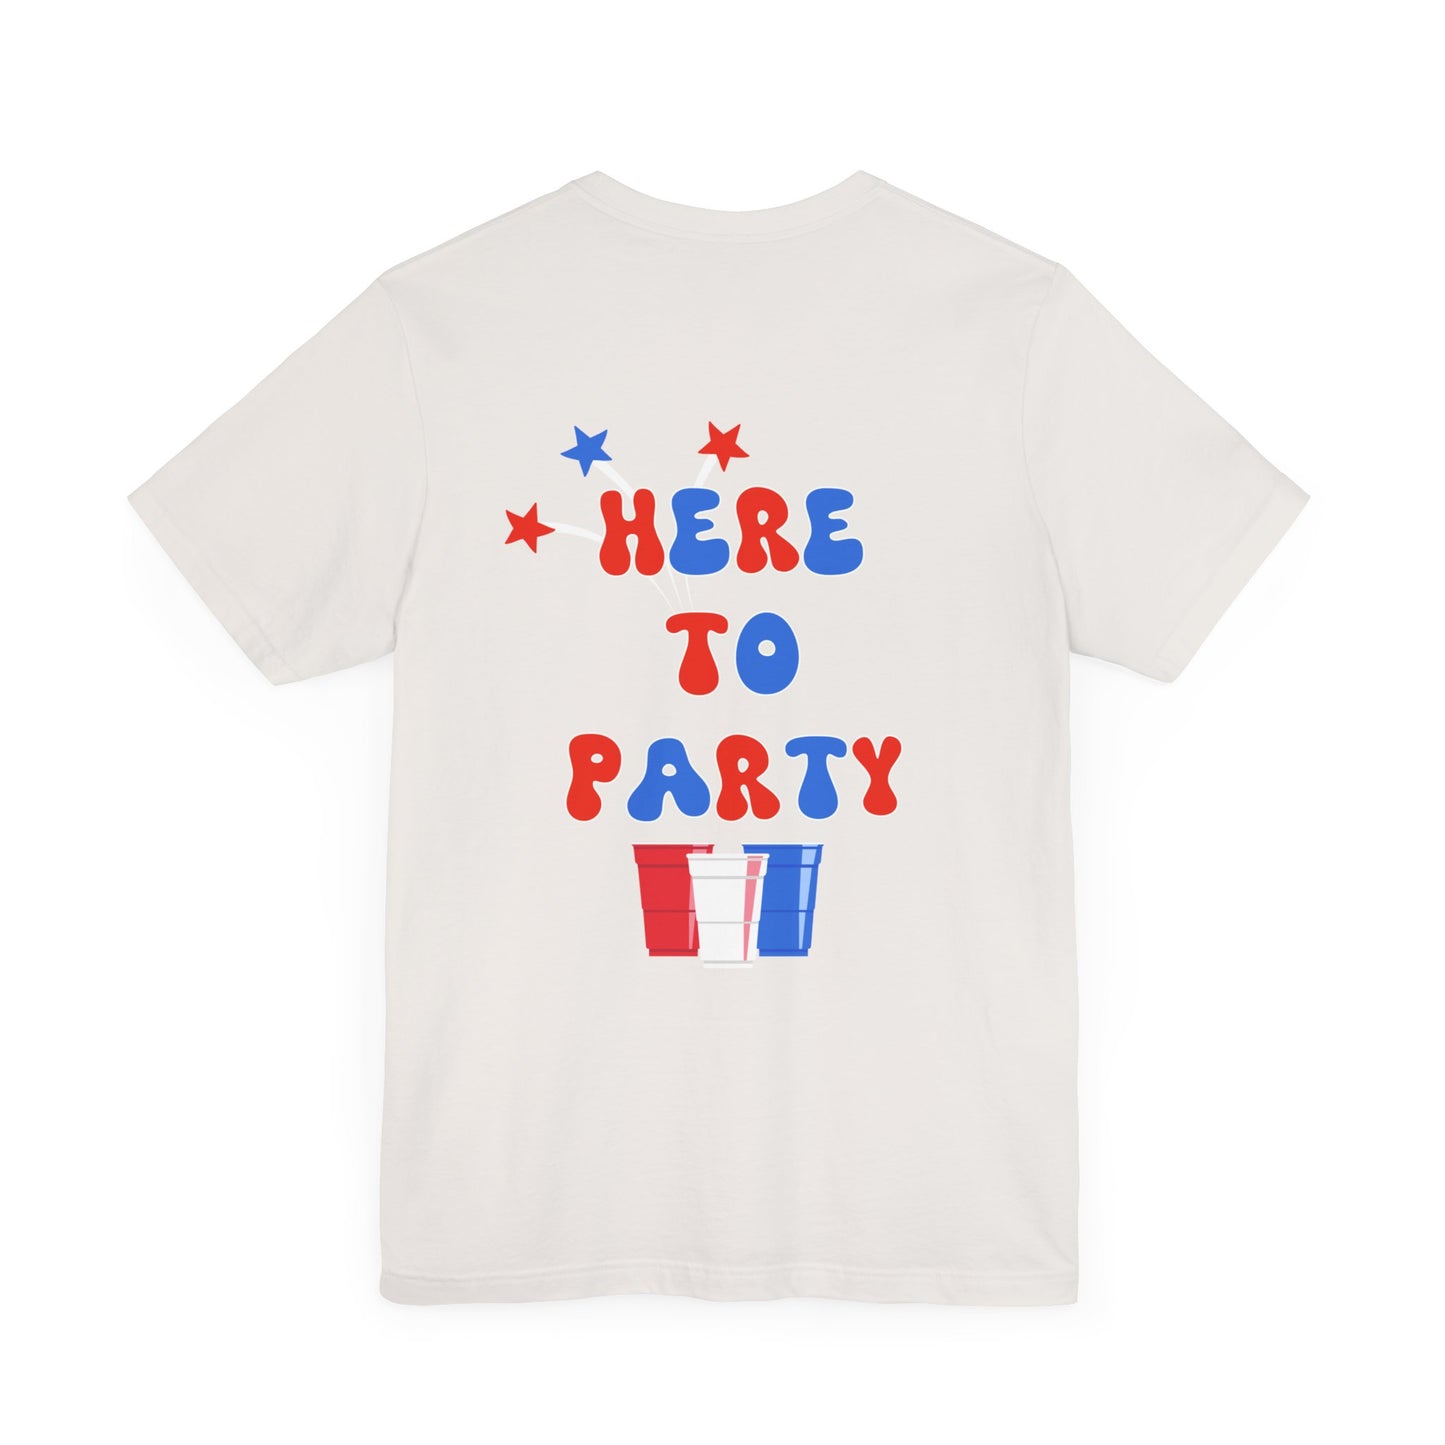 Here to Party Tee